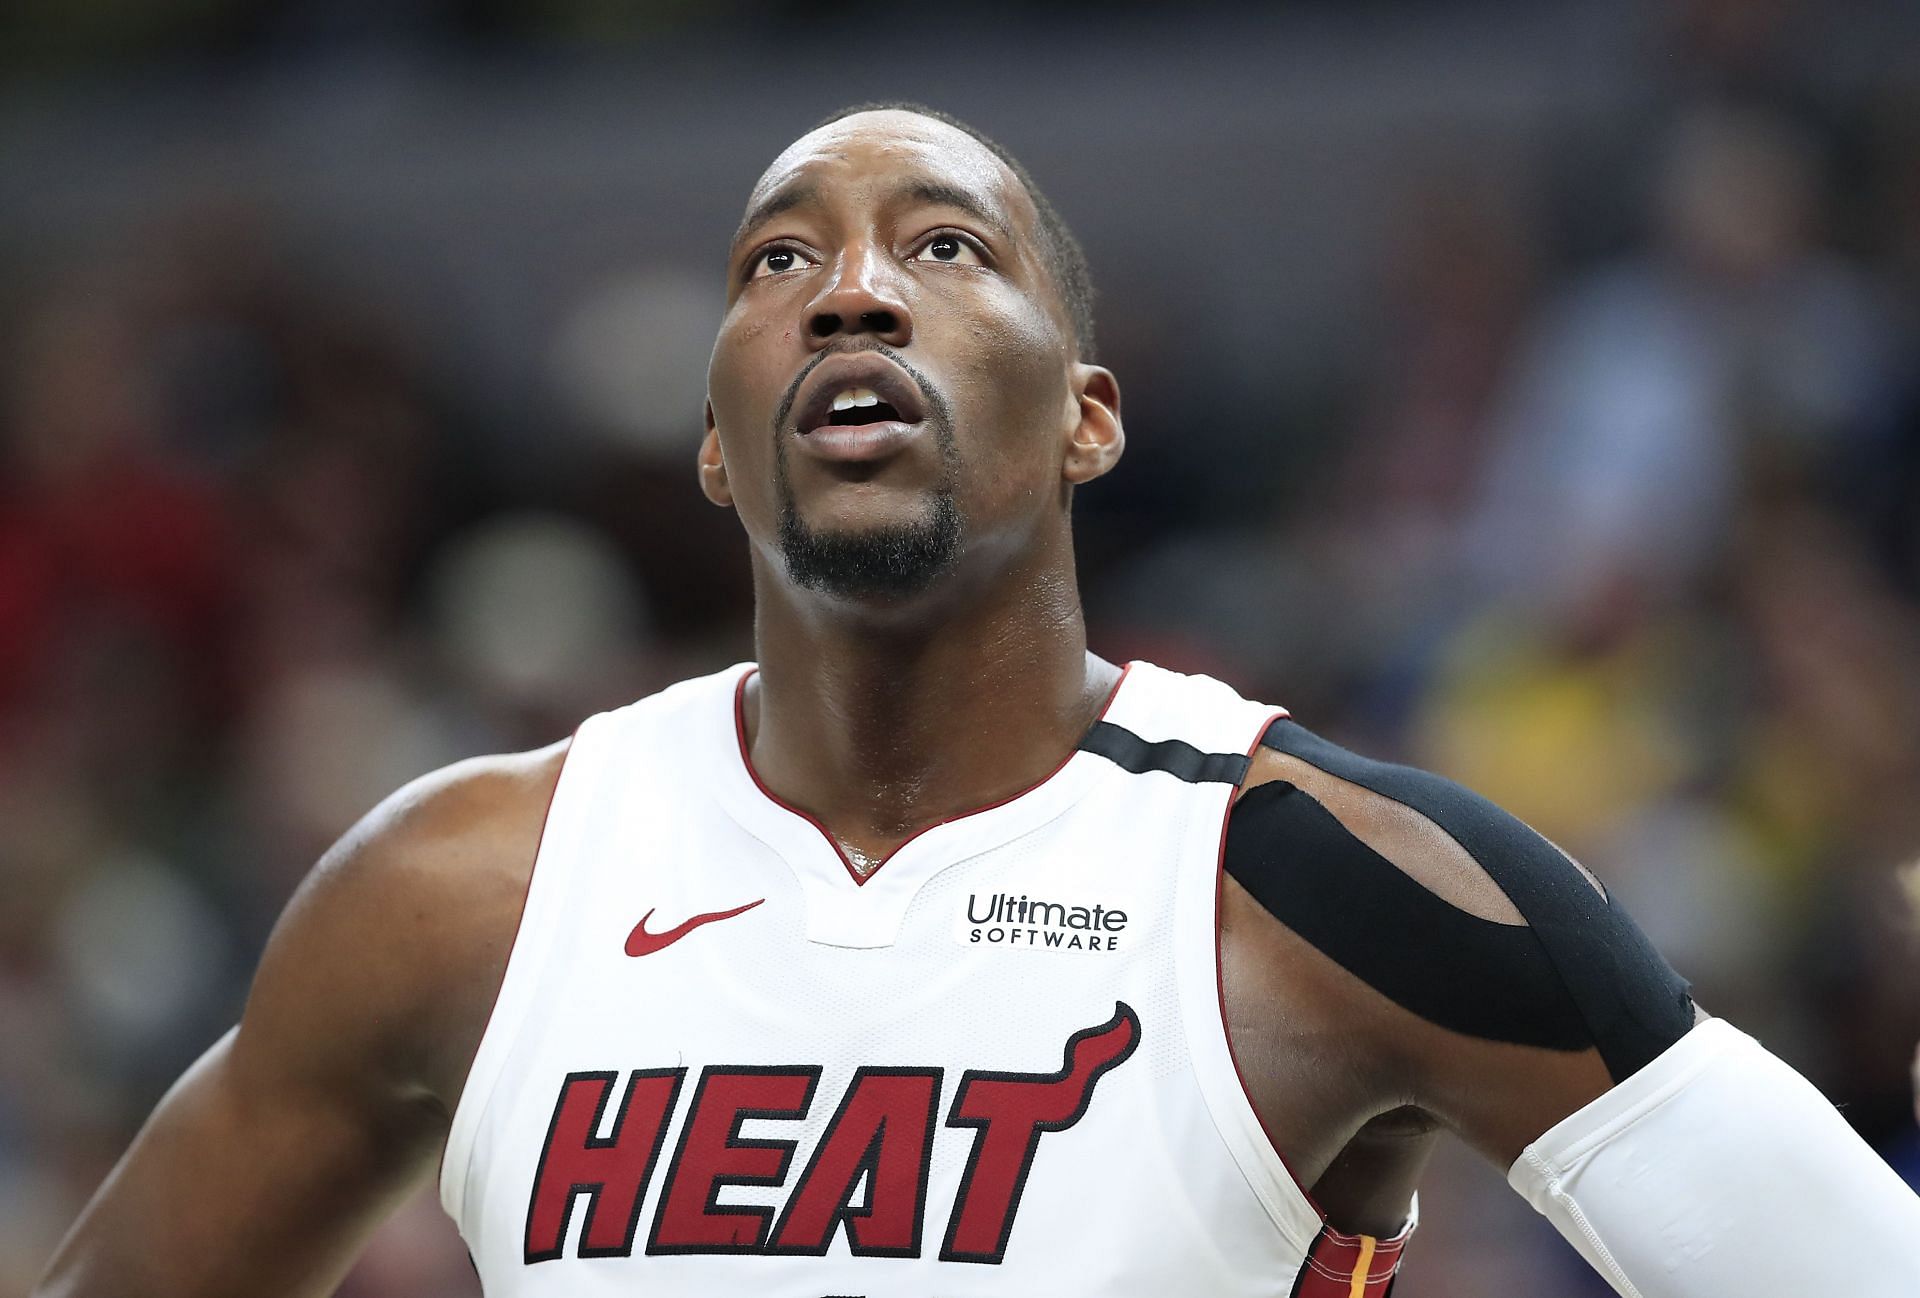 Bam Adebayo of the Miami Heat has been struggling with a knock